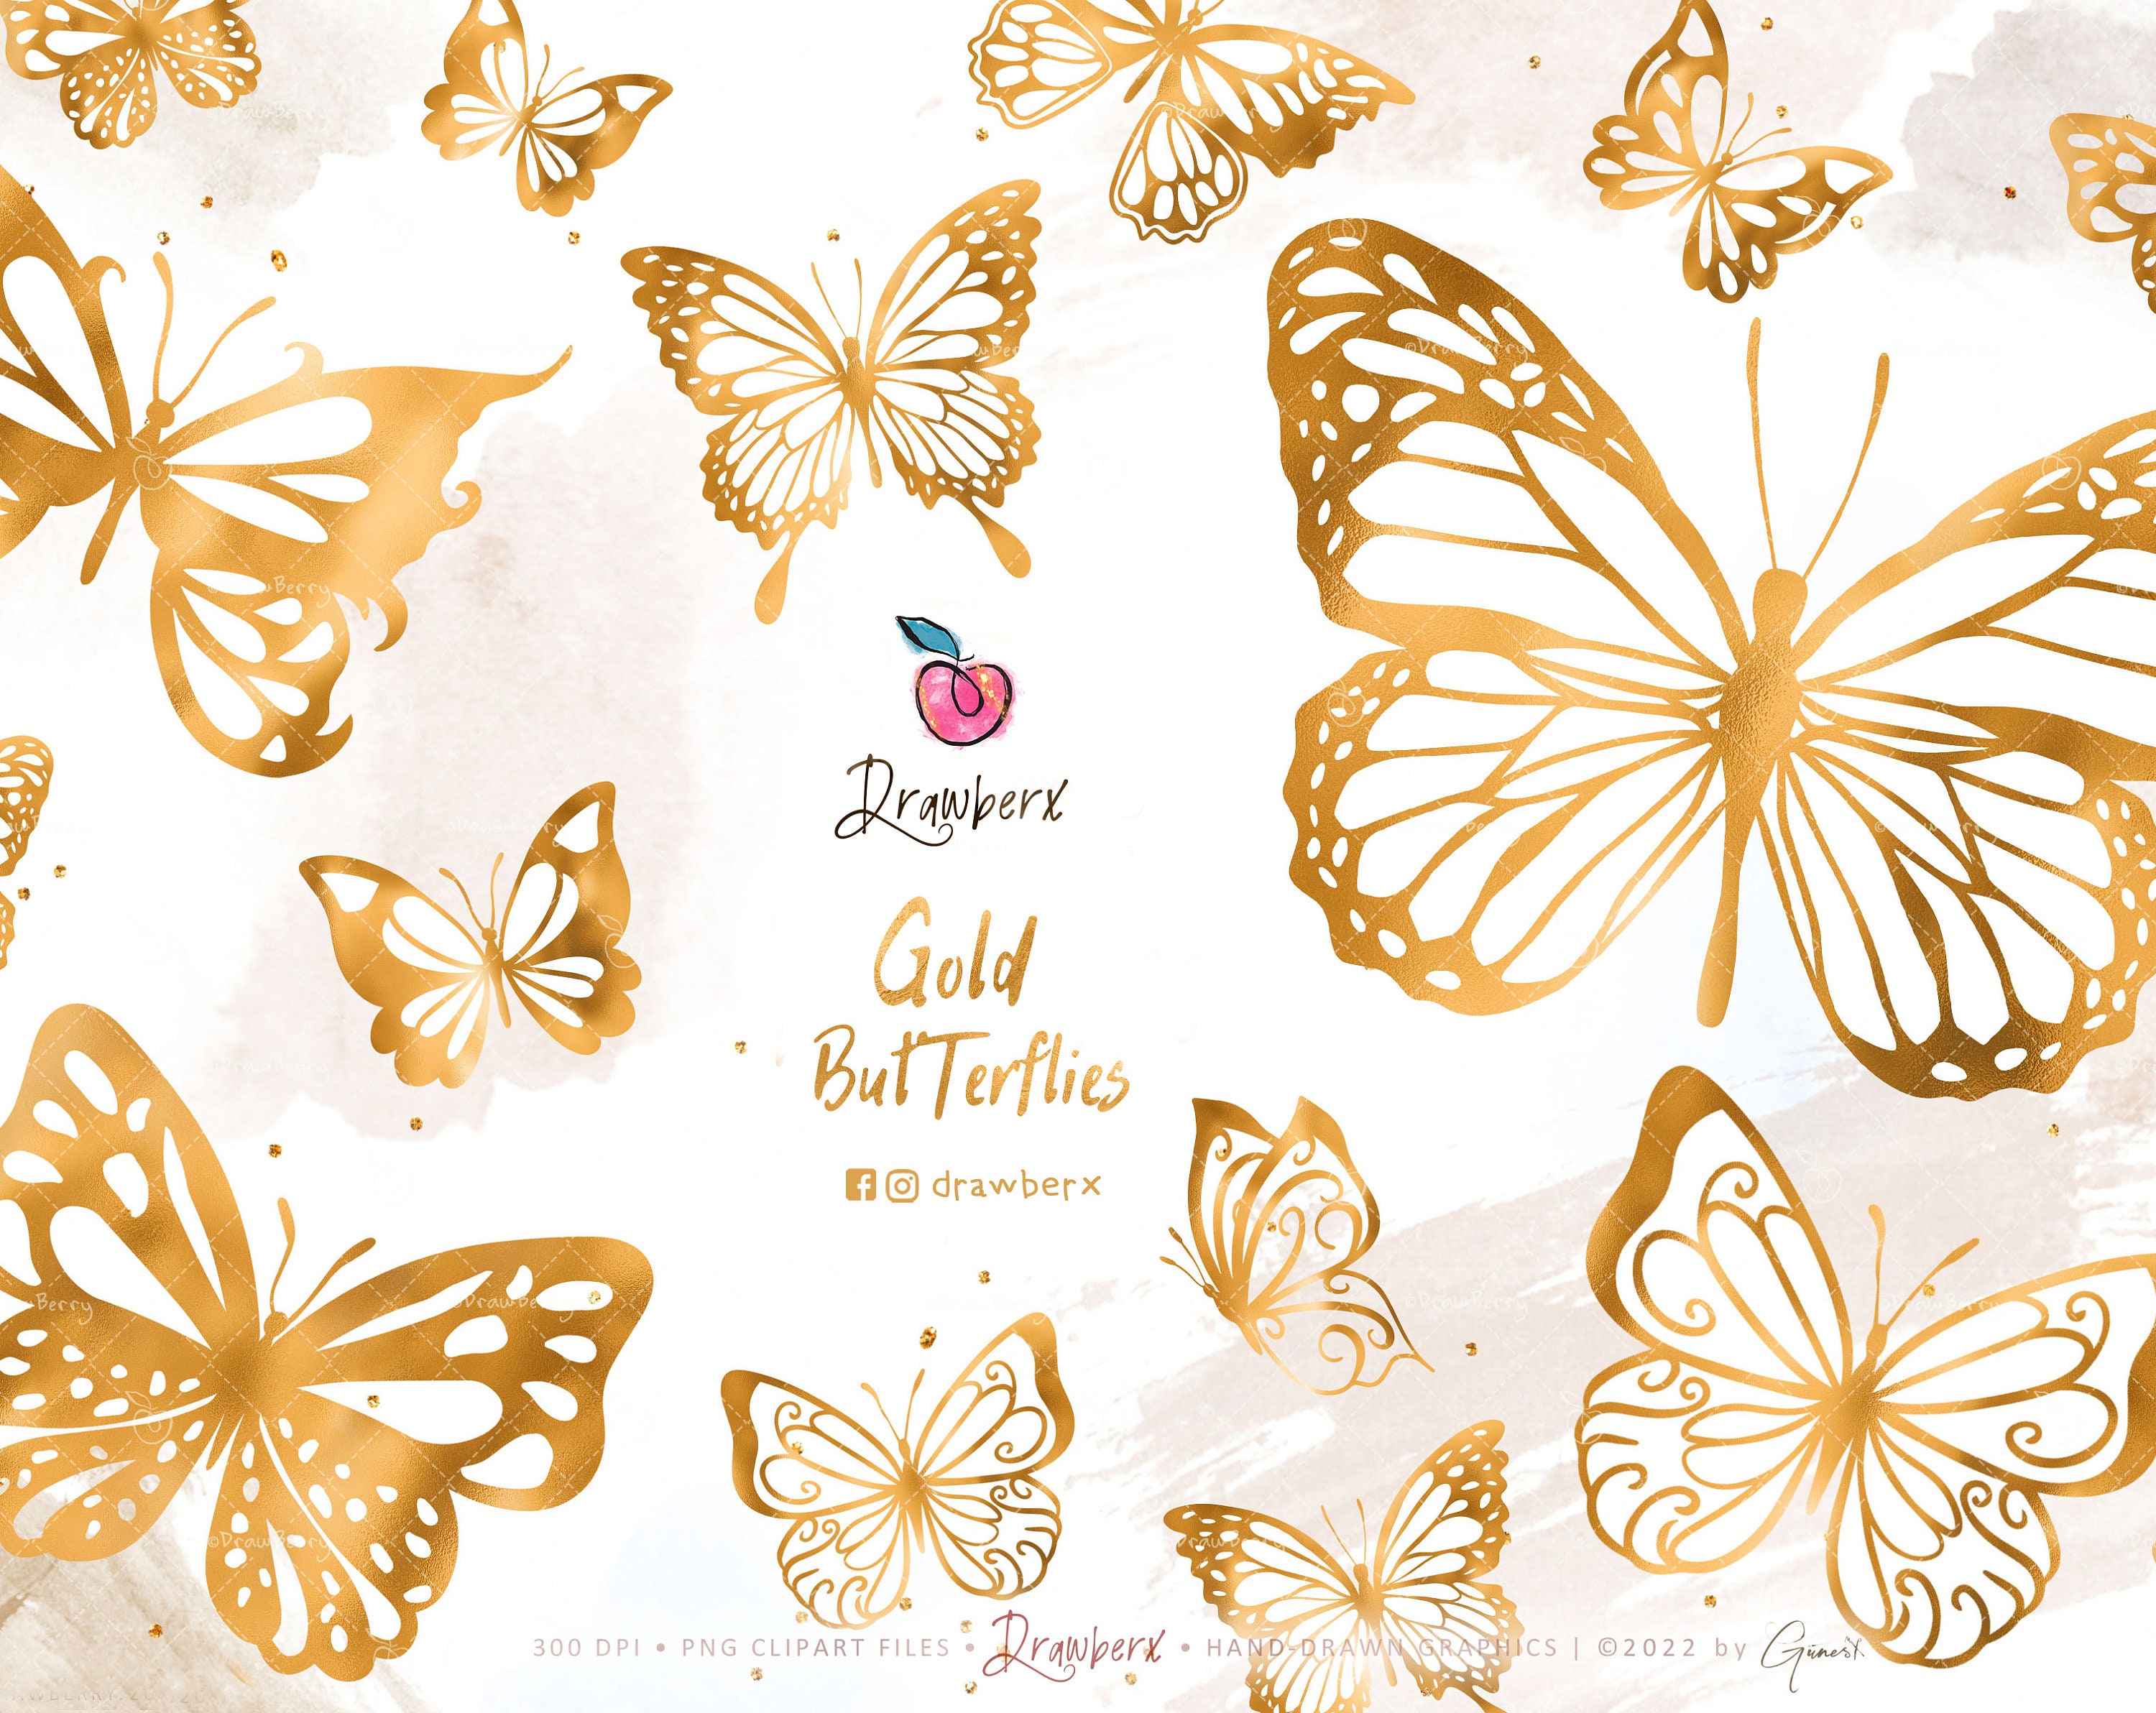 Floating Butterflies Print and Cut PNG Download | Gold Glitter Butterfly  Sublimation Design | Cricut Cut Files Instant Download SC1544GG